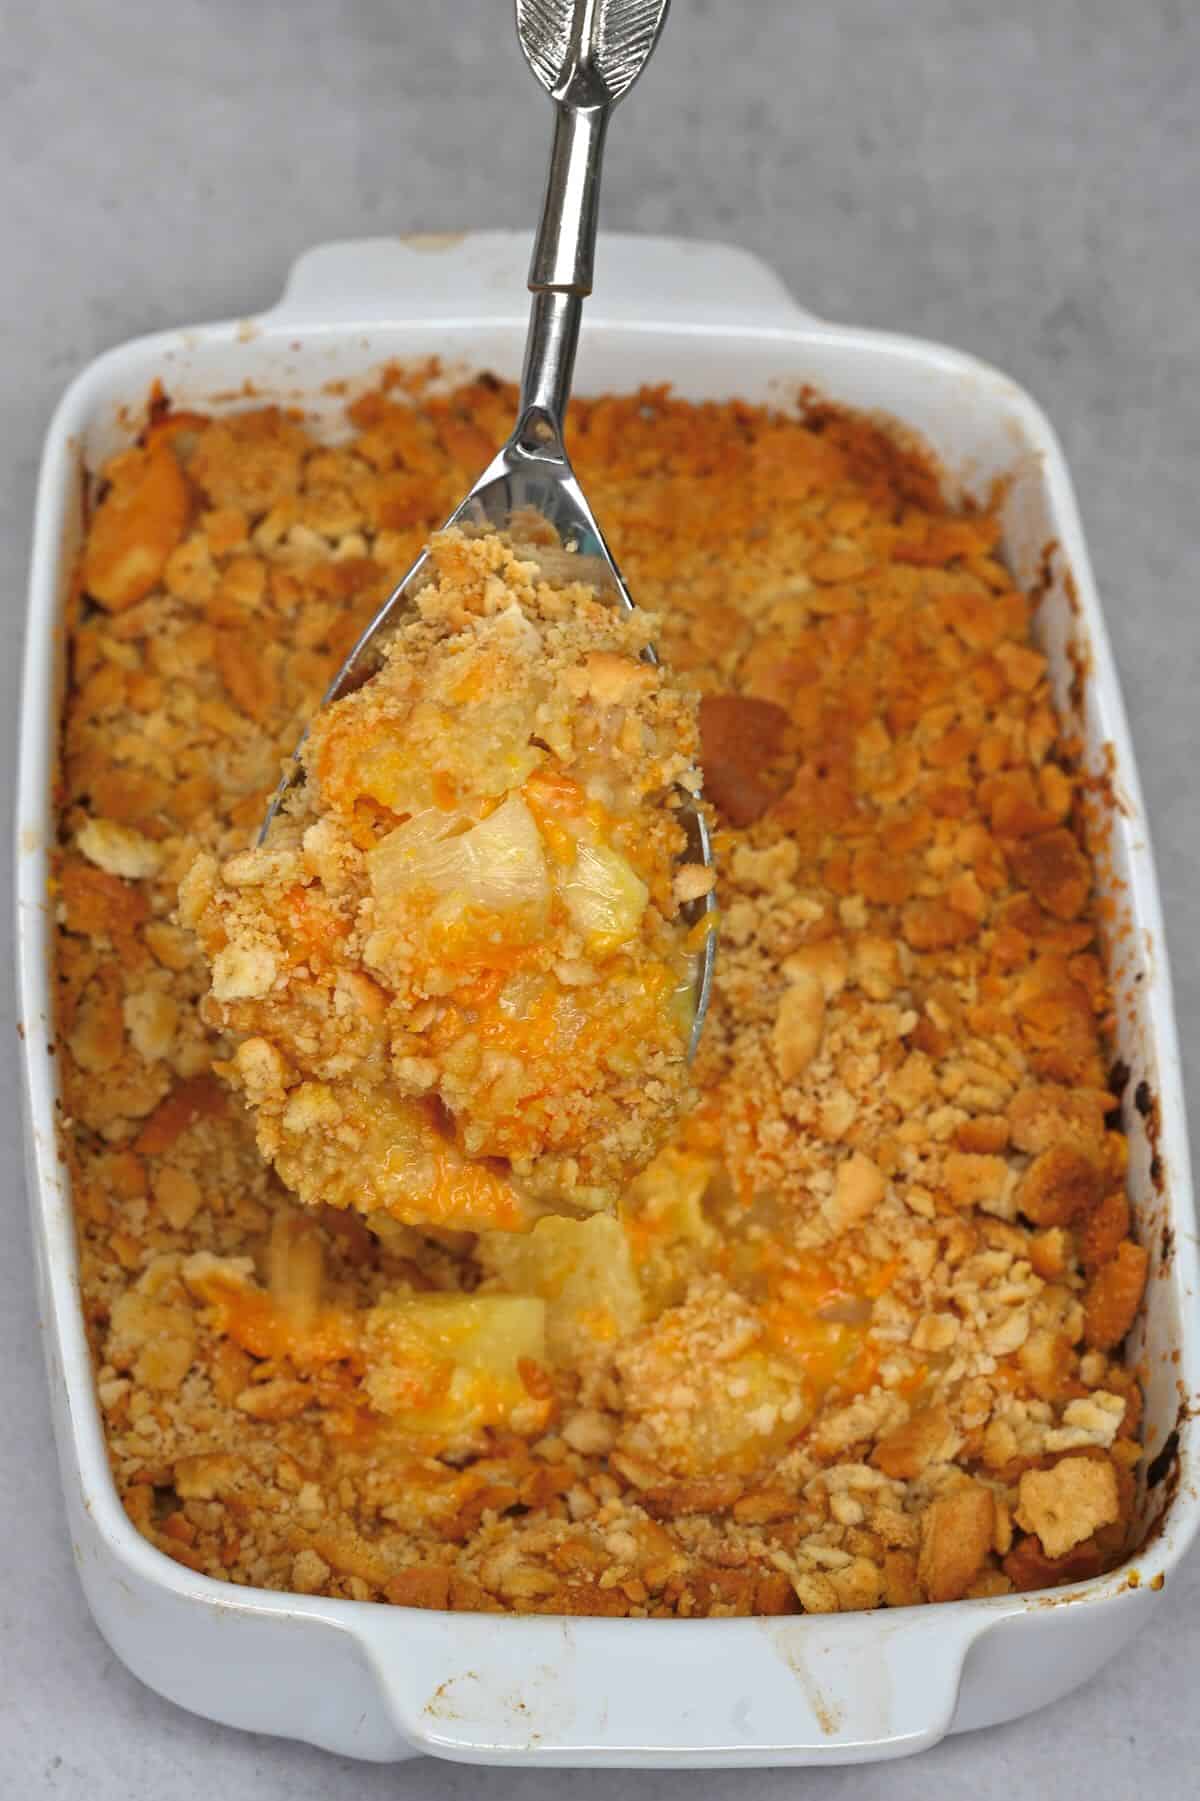 A spoonful of pineapple casserole over a baking dish